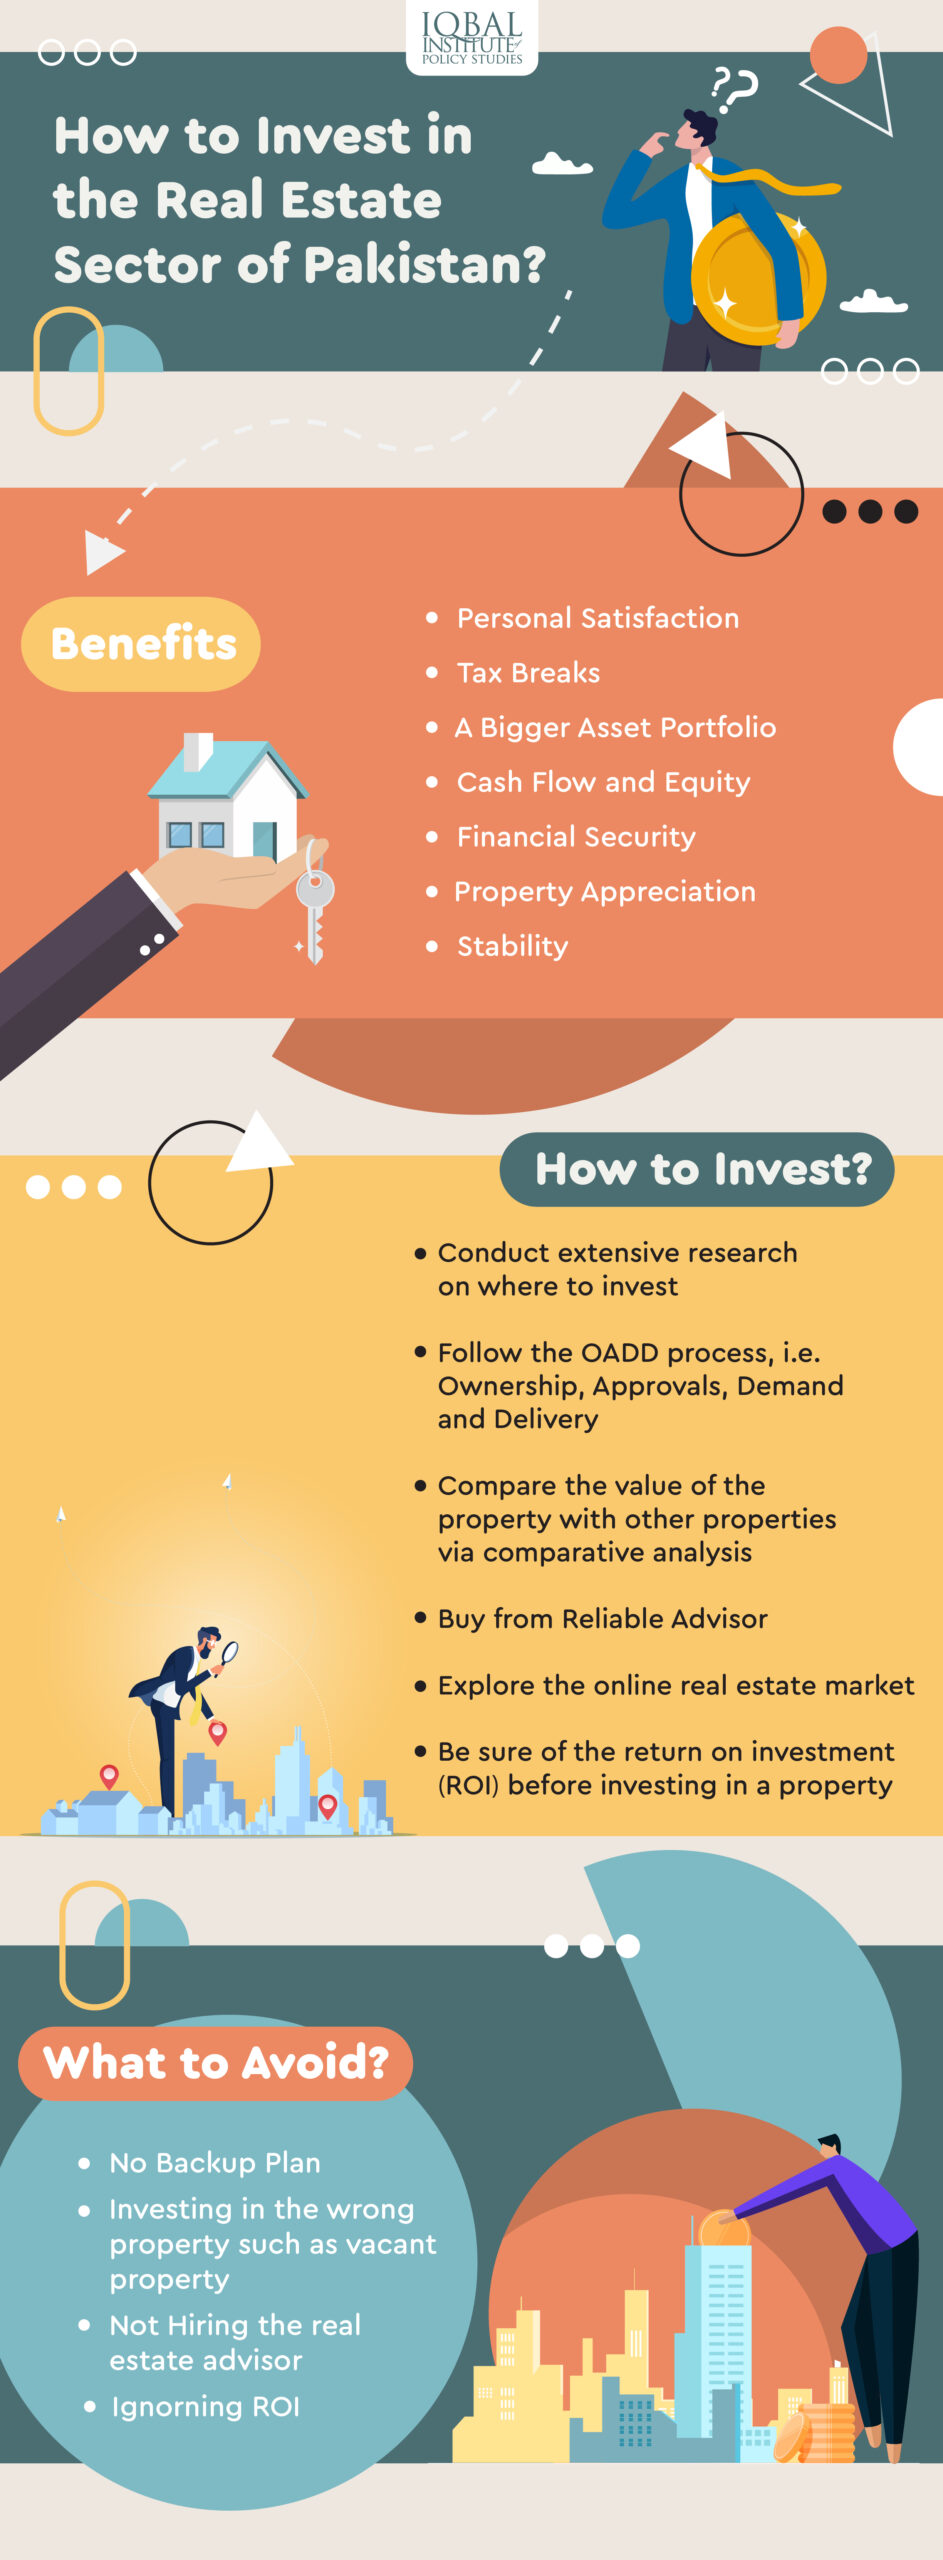 How to Invest in Real Estate Sector of Pakistan?